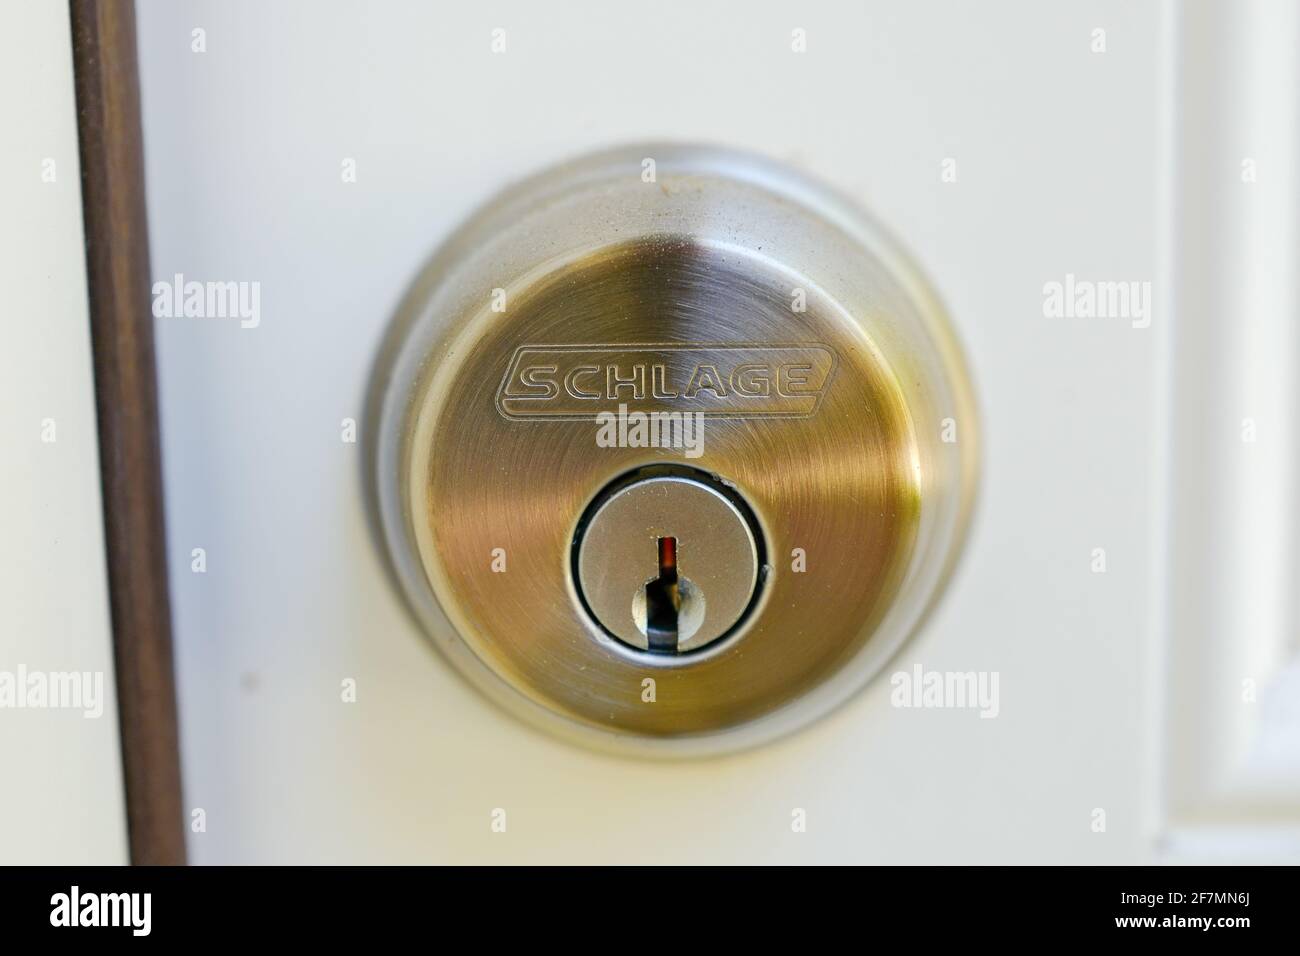 United States. 17th Feb, 2021. Close-up of a bronze deadbolt with a Schlage logo, attached to a white door, February 17, 2021. (Photo by Smith Collection/Gado/Sipa USA) Credit: Sipa USA/Alamy Live News Stock Photo